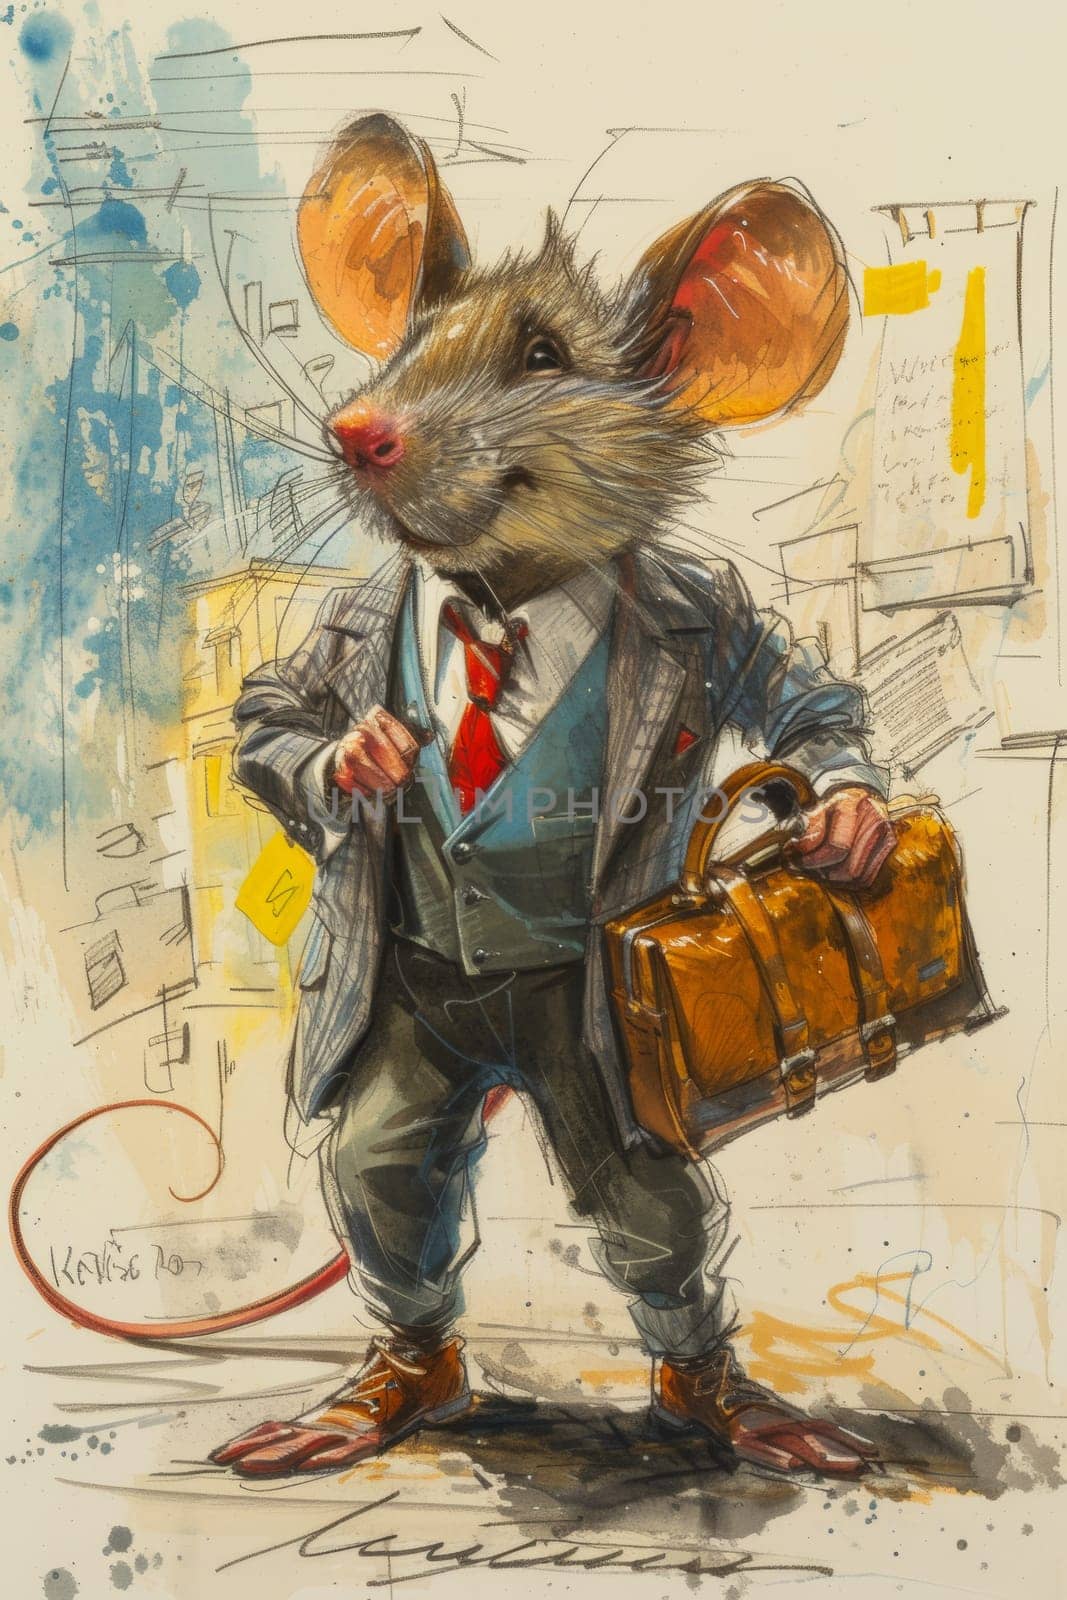 A drawing of a mouse in suit and tie holding briefcase